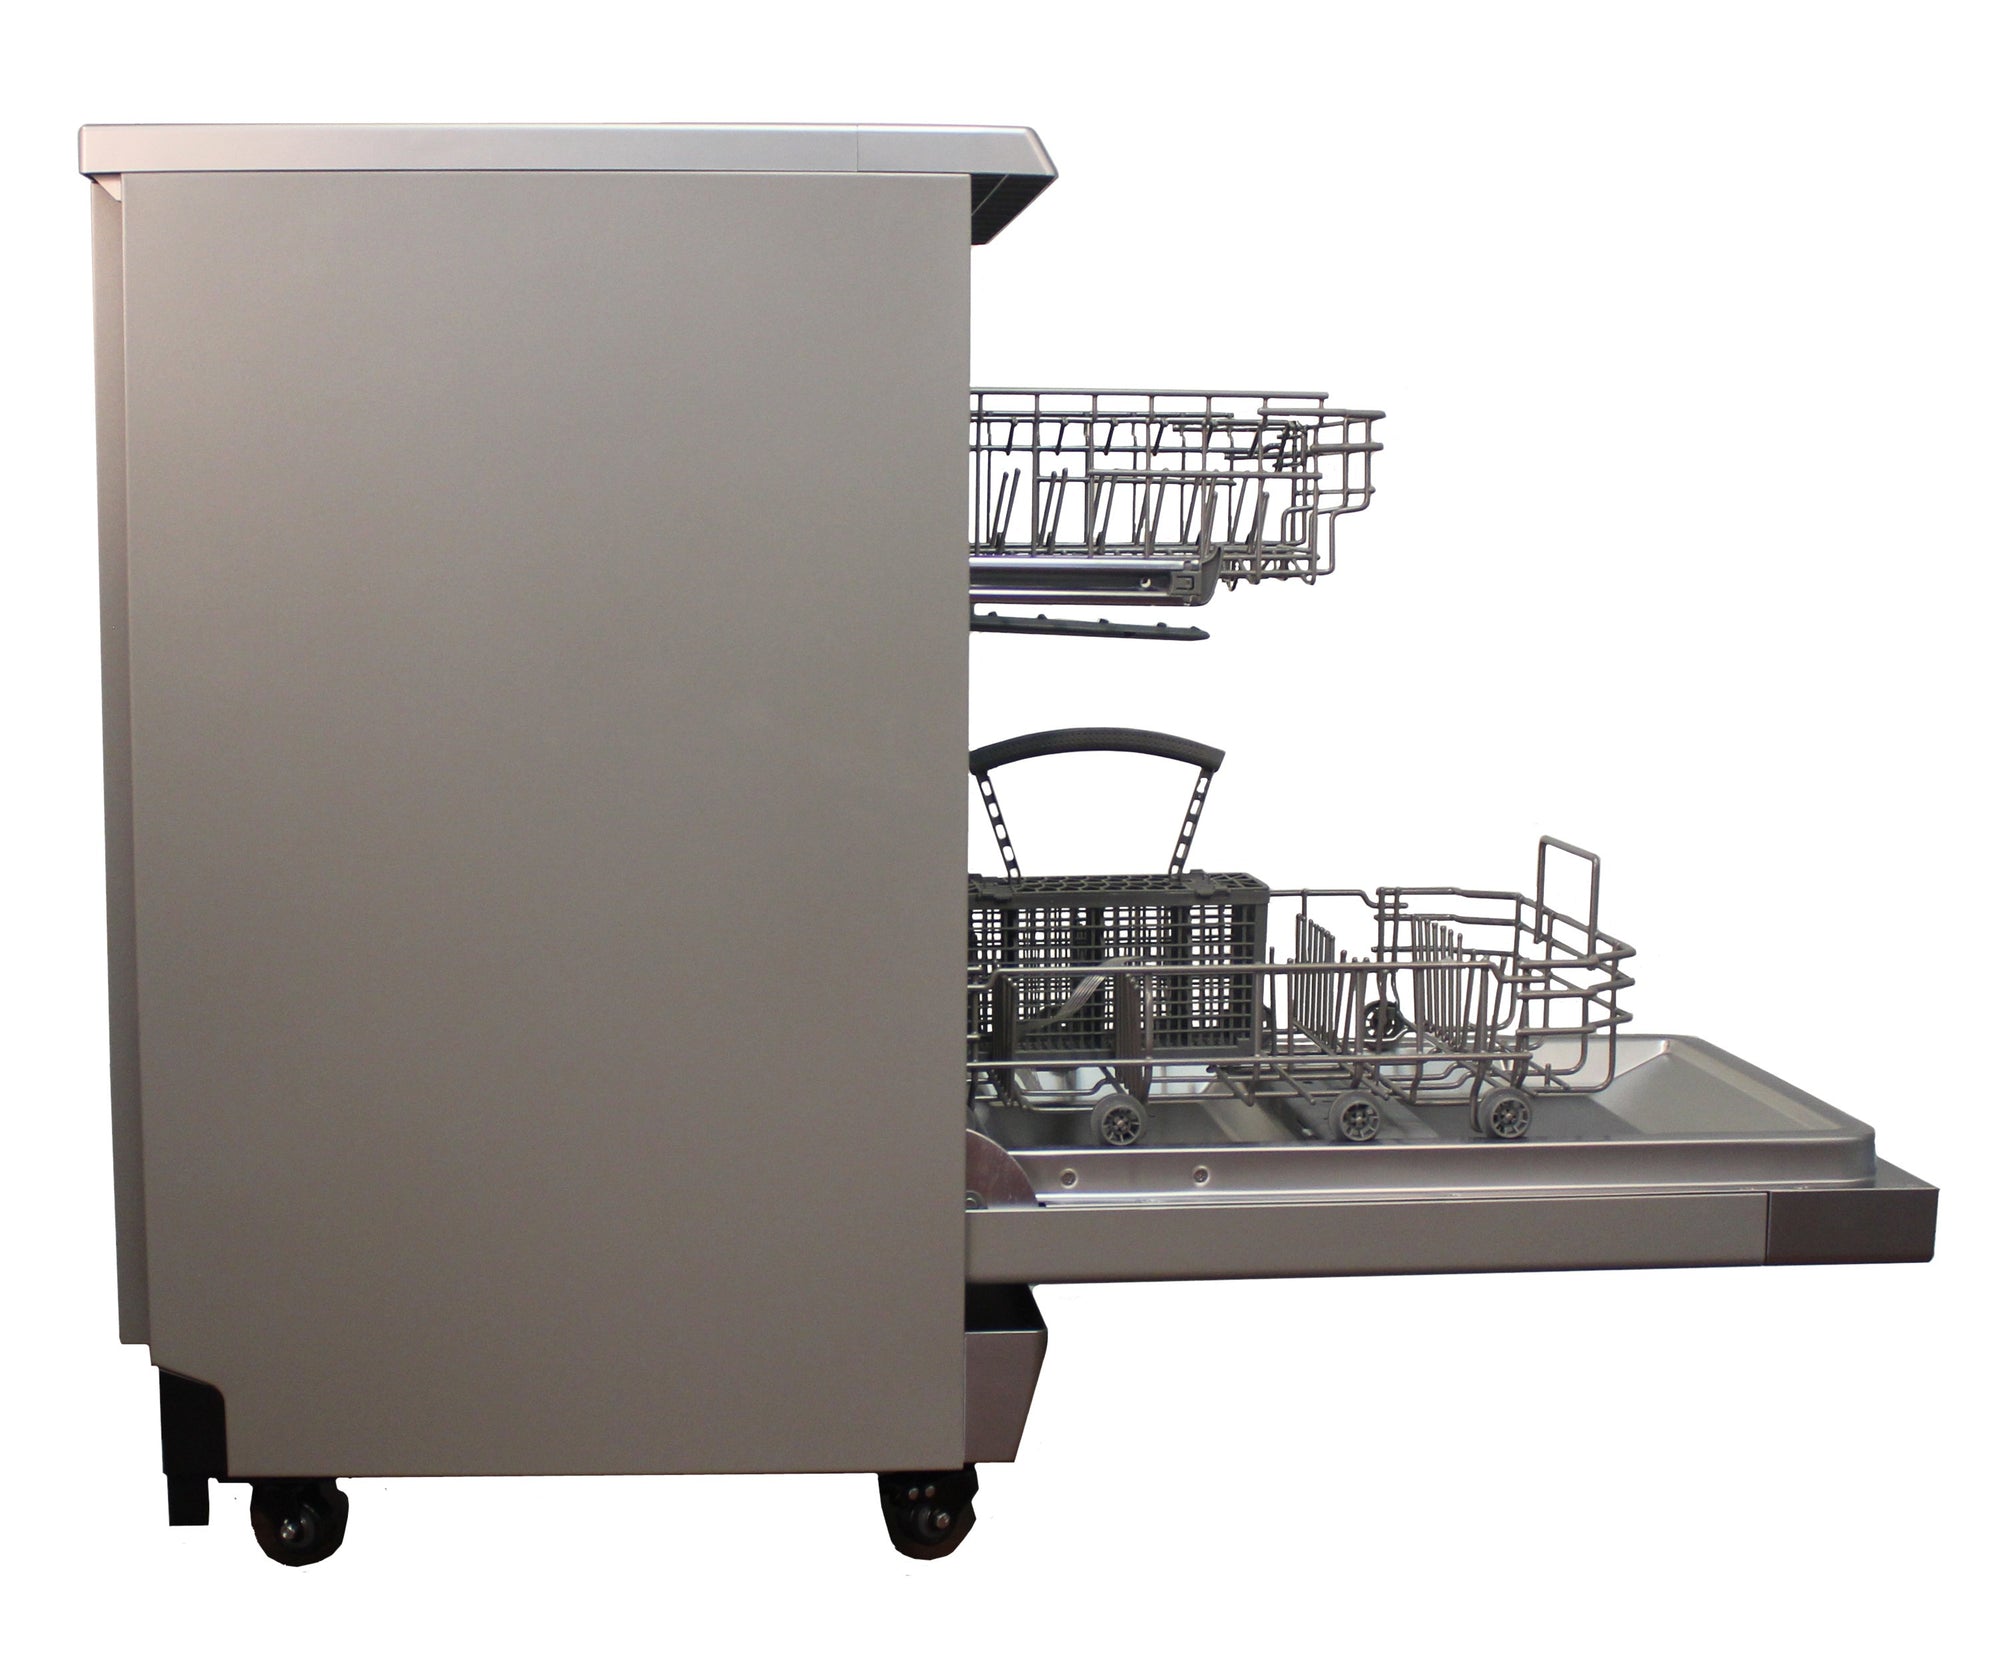 Sunpentown 18" Energy Star Portable Dishwasher - Stainless Steel New